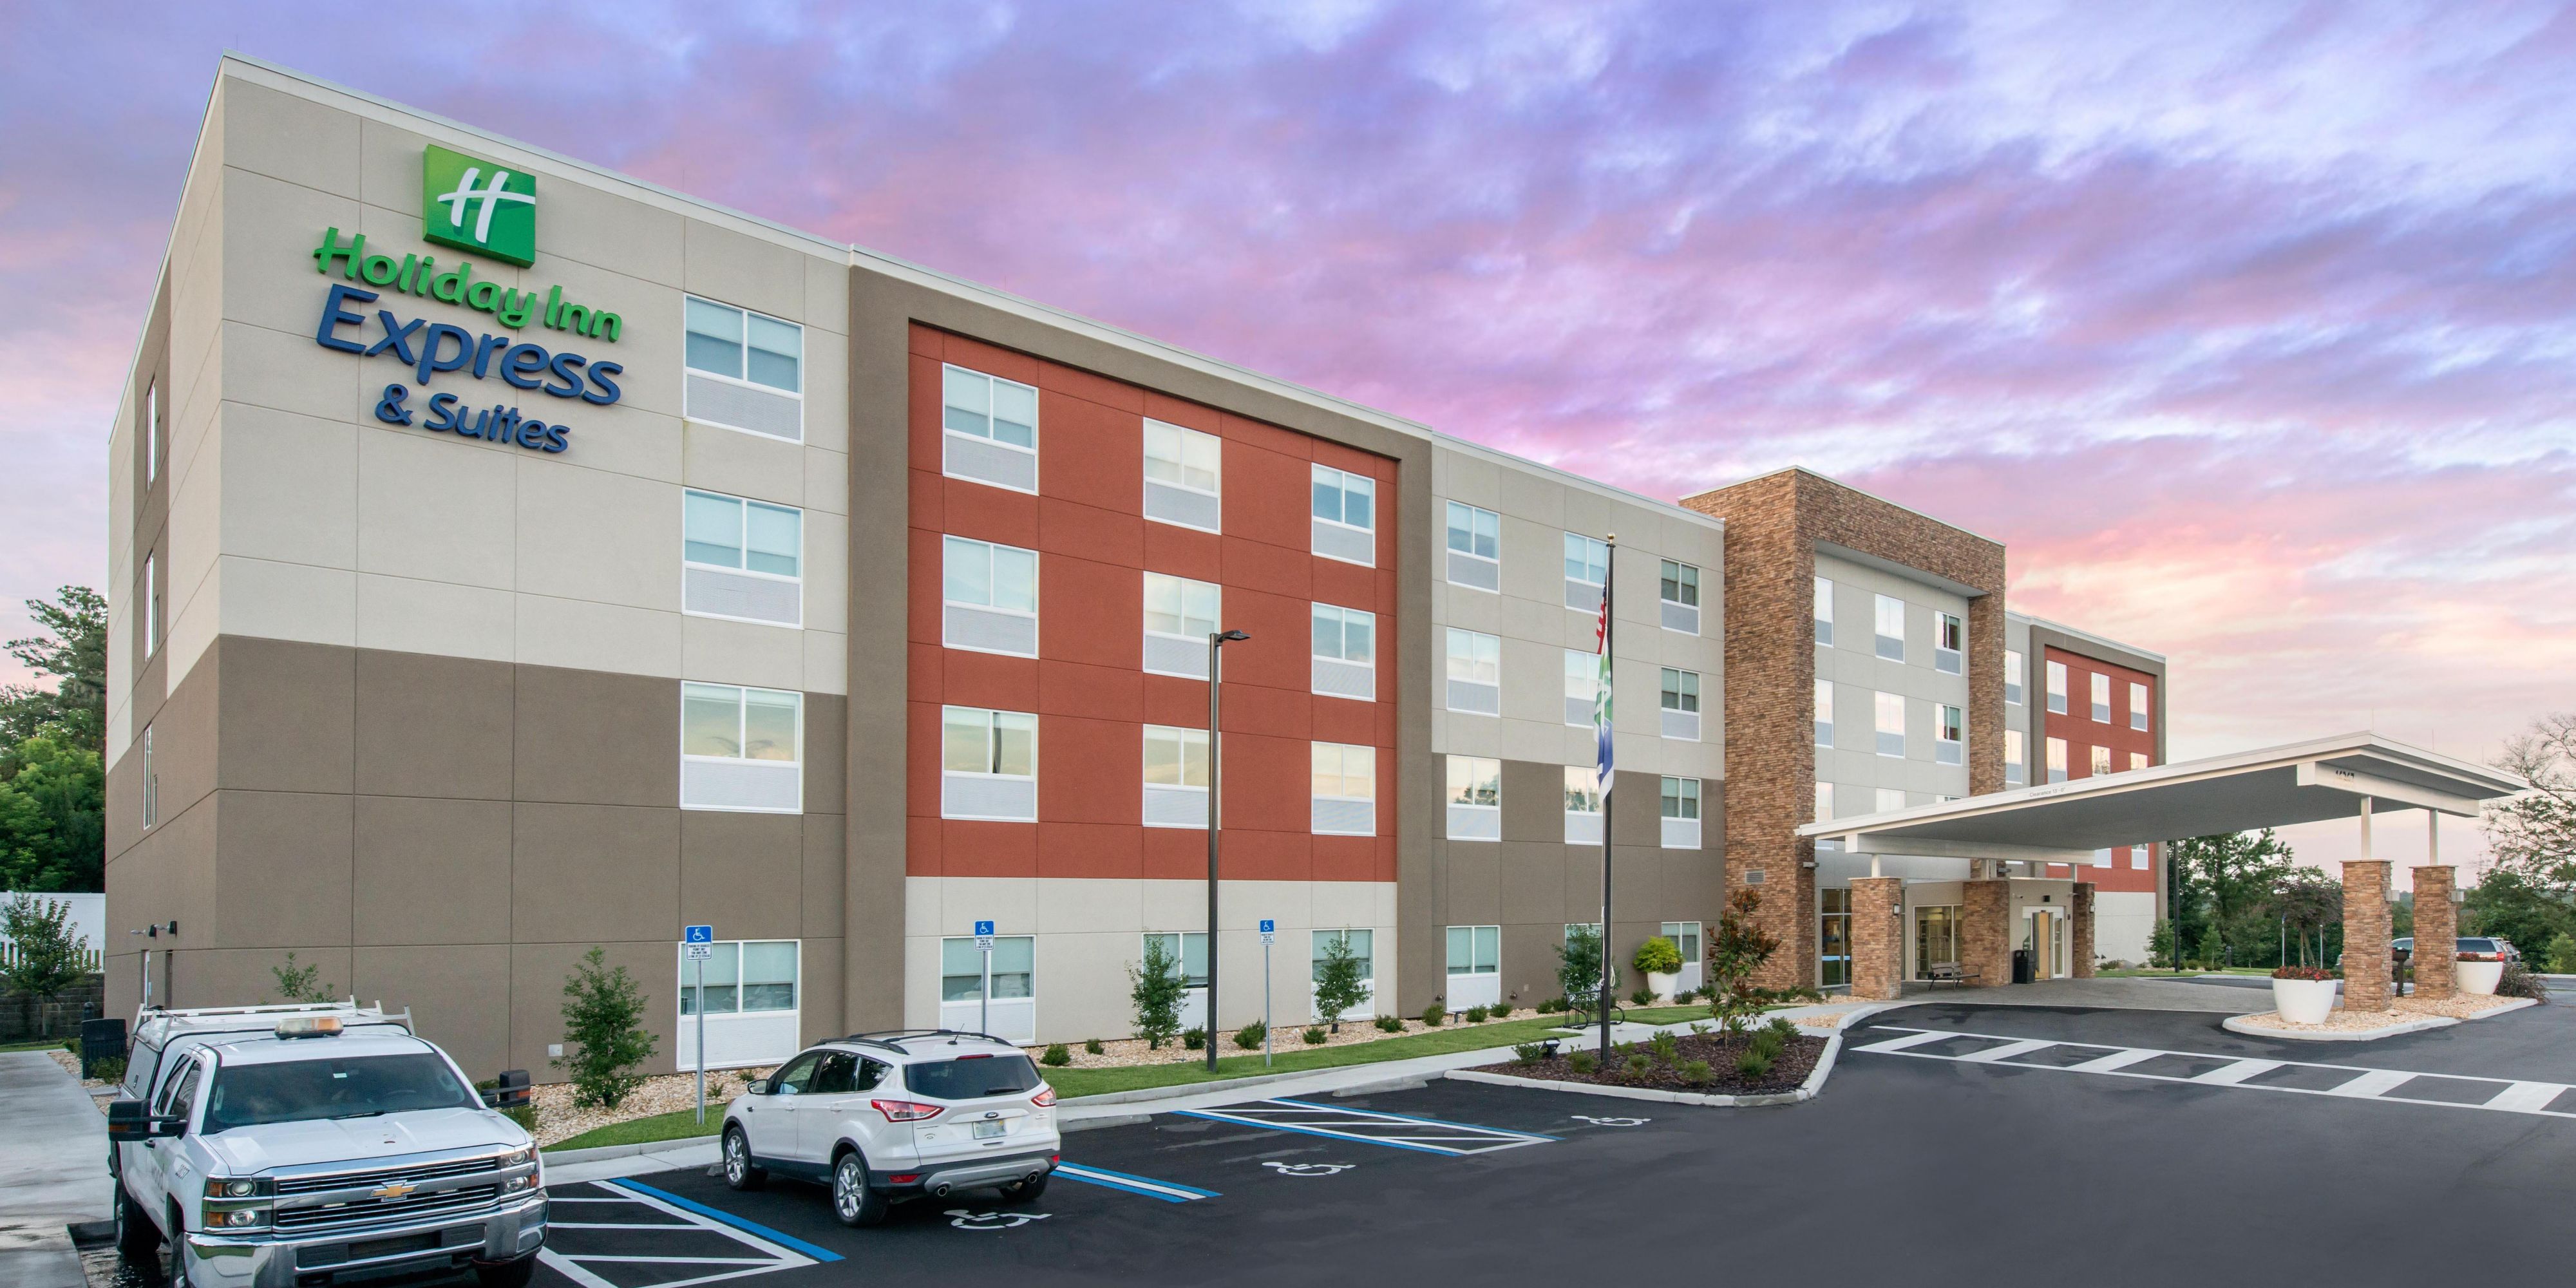 Learn more about The Holiday Inn Express & Suites in West Melbourne.